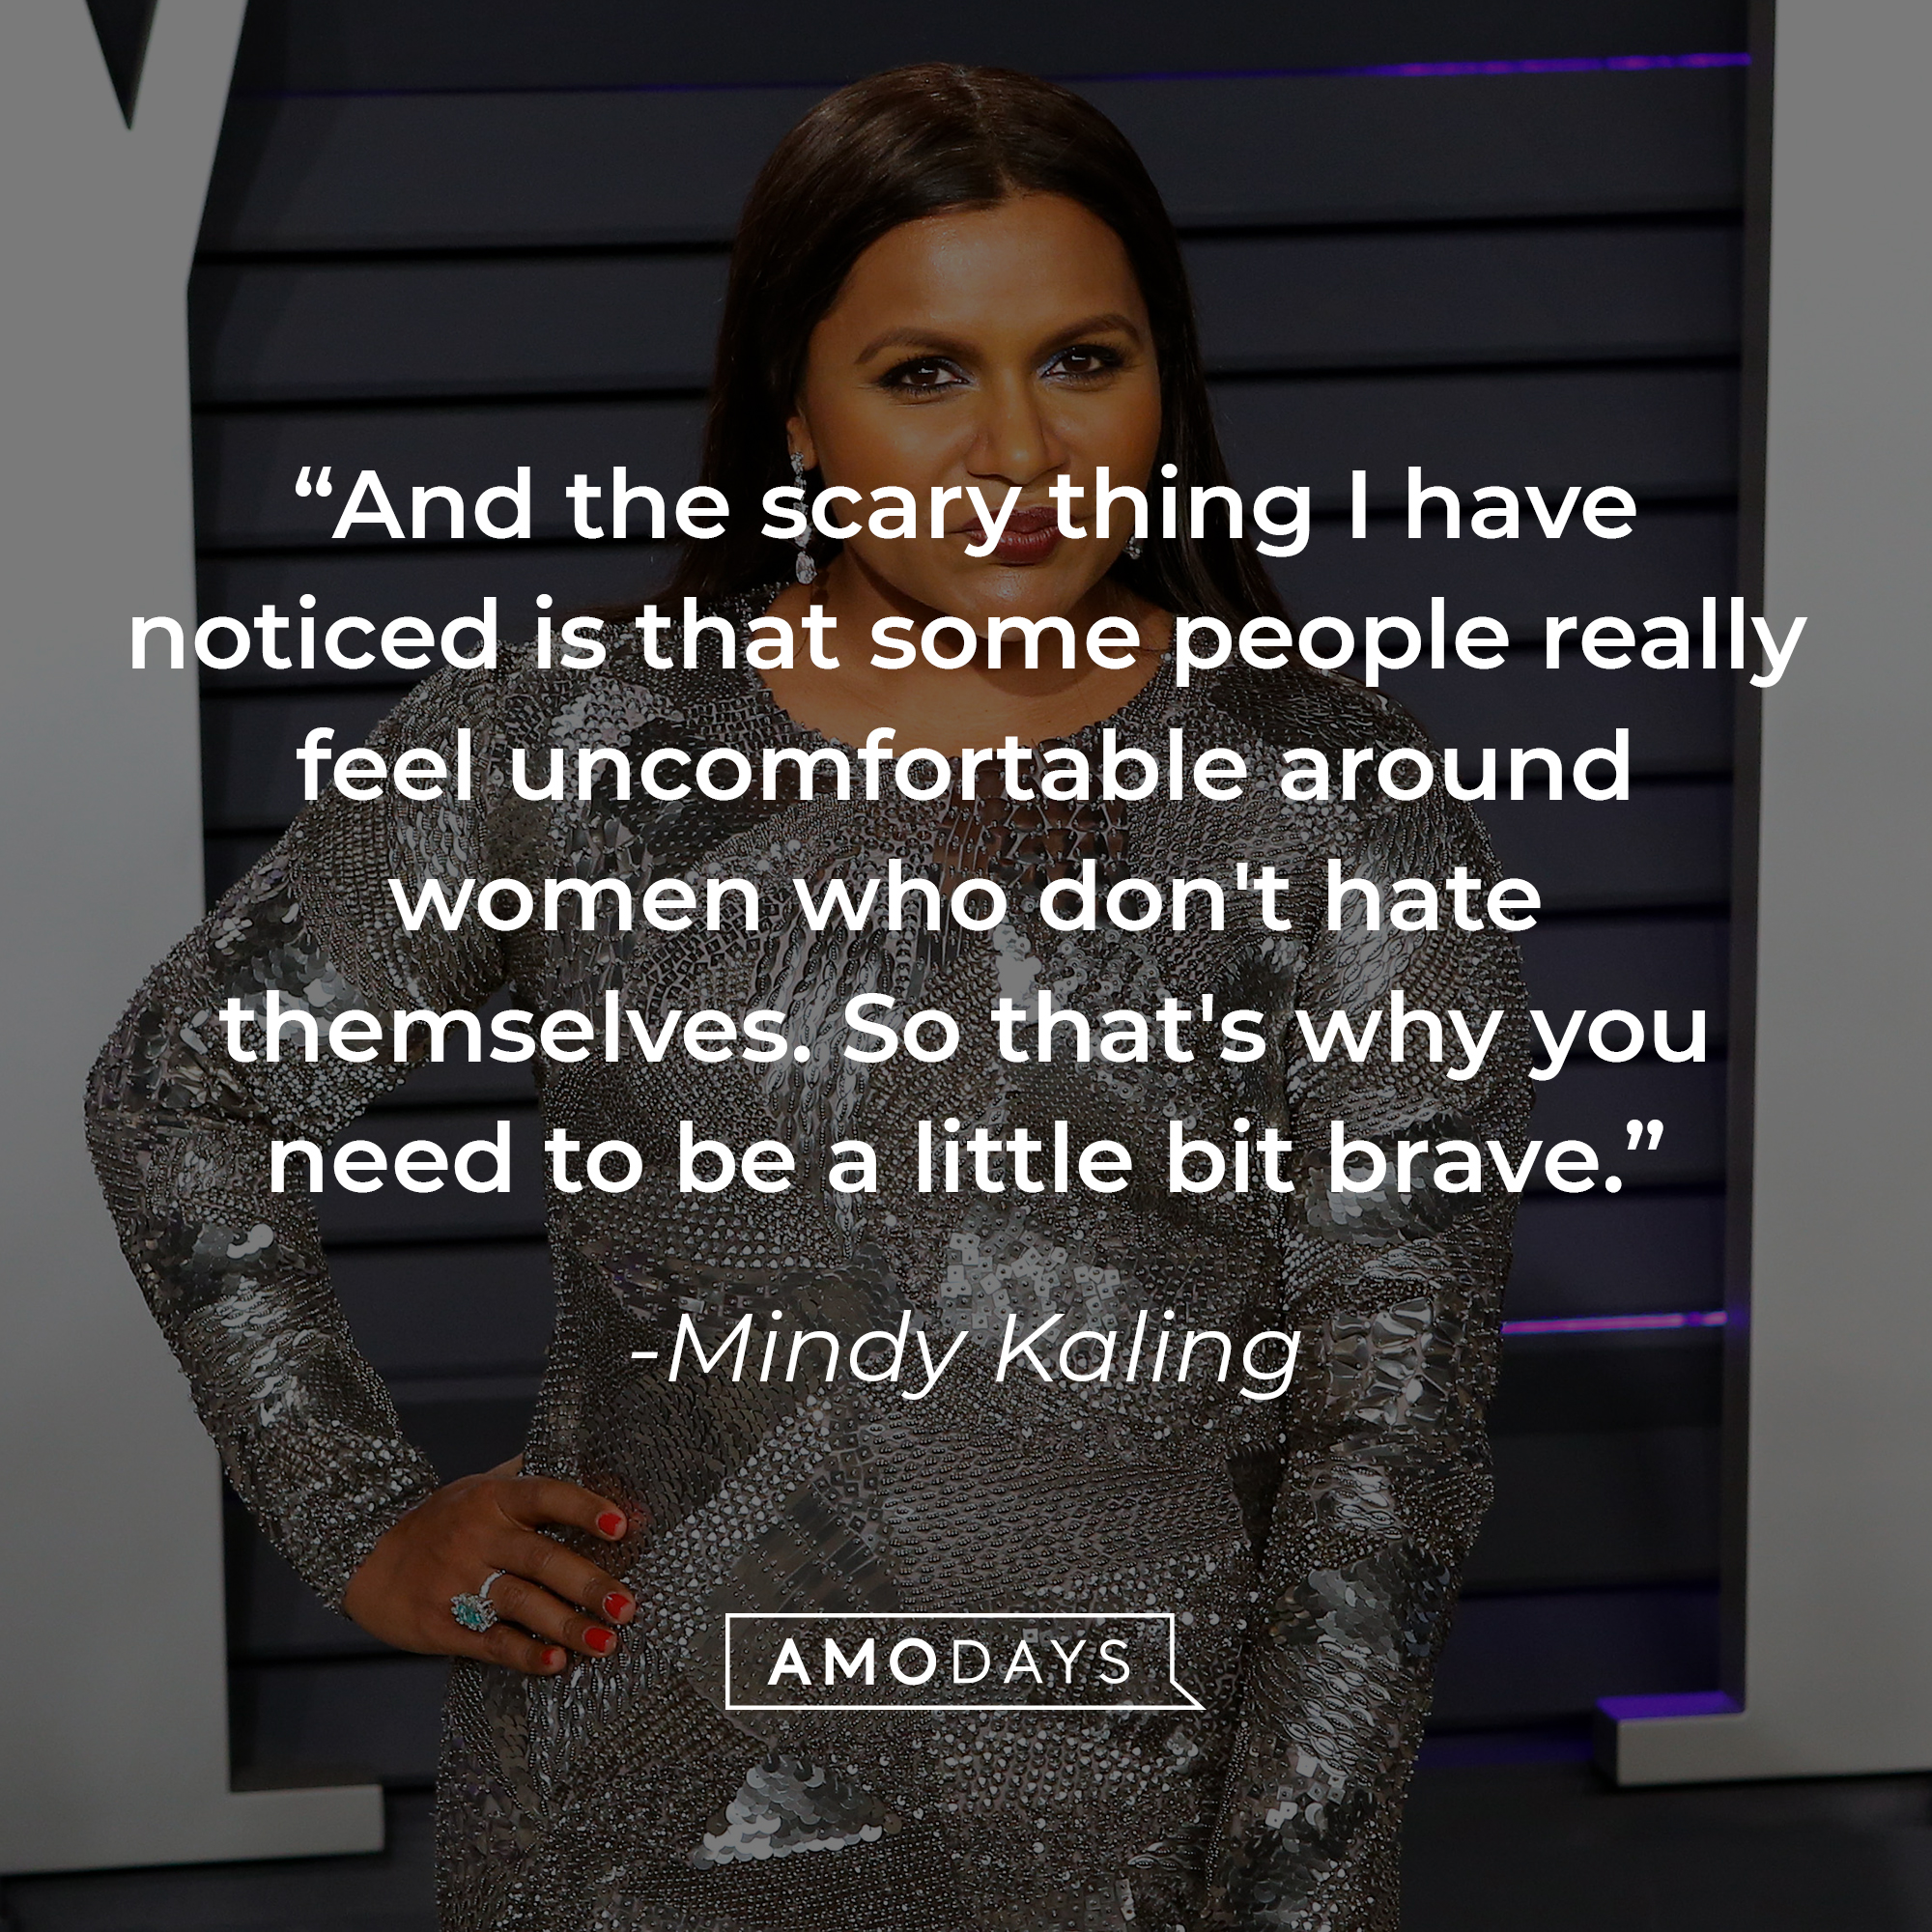 Mindy Kaling's quote: "And the scary thing I have noticed is that some people really feel uncomfortable around women who don't hate themselves. So that's why you need to be a little bit brave." | Source: Getty Images